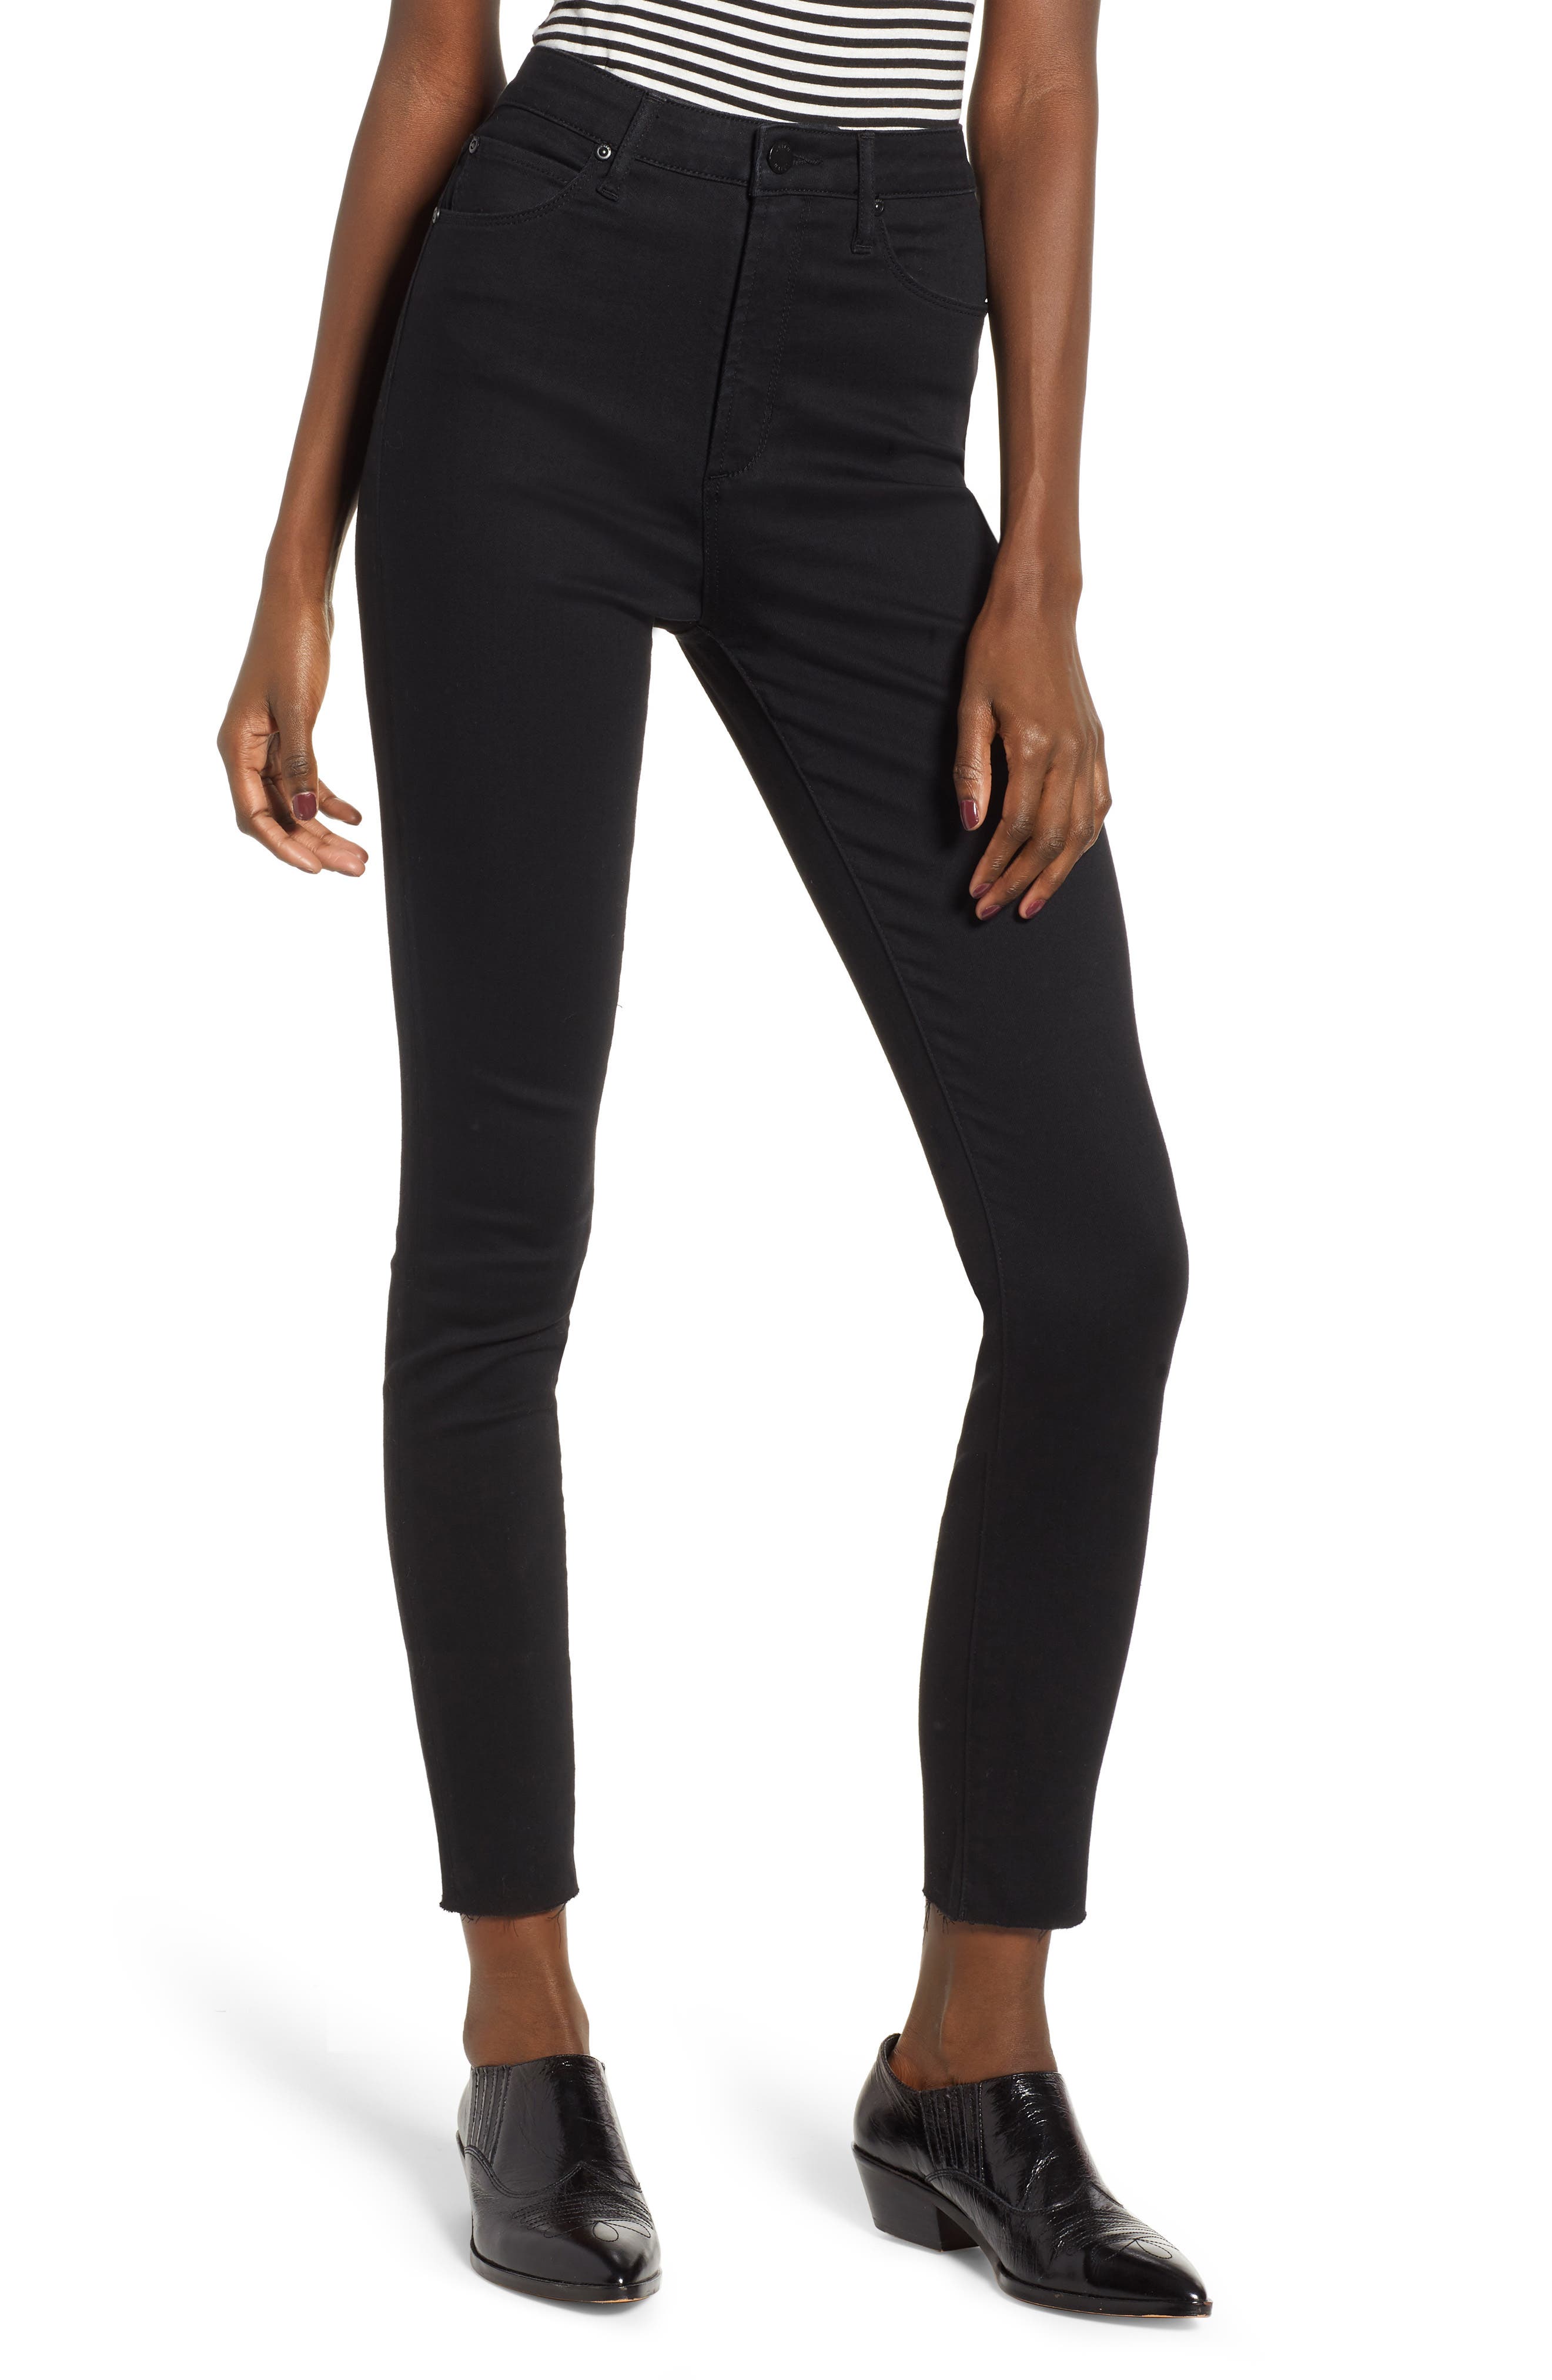 black high waisted ankle jeans